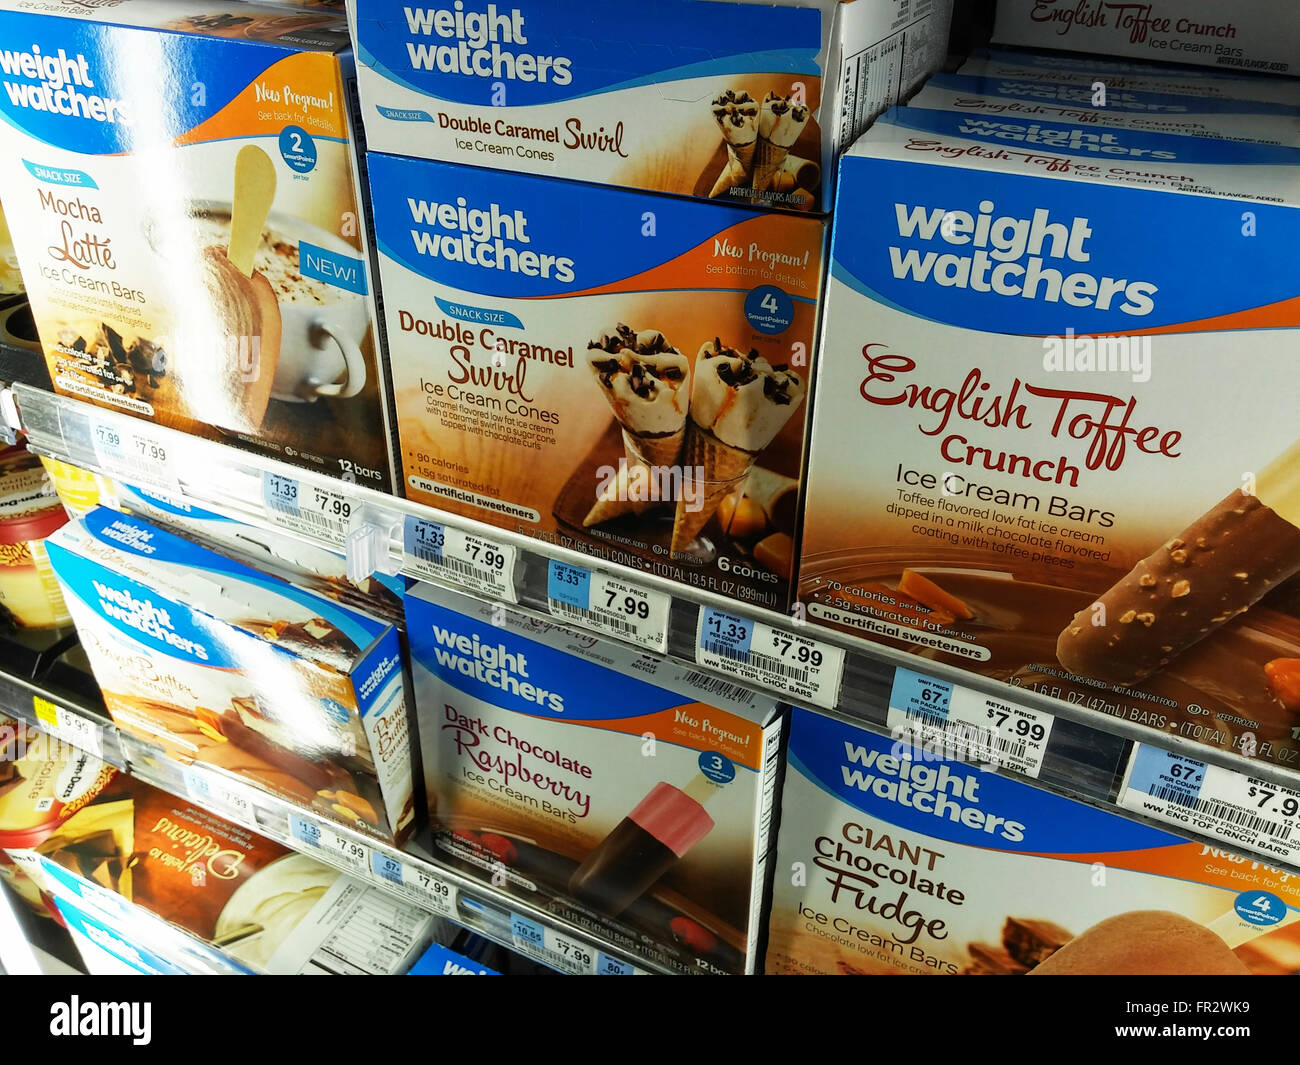 Weight Watchers brand ice cream in a supermarket freezer in New York on Thursday, March 17, 2016. Despite the affiliation with Oprah Winfrey Weight Watchers stock is down 40% this year as consumers show little interest in the brand. (© Richard B. Levine) Stock Photo